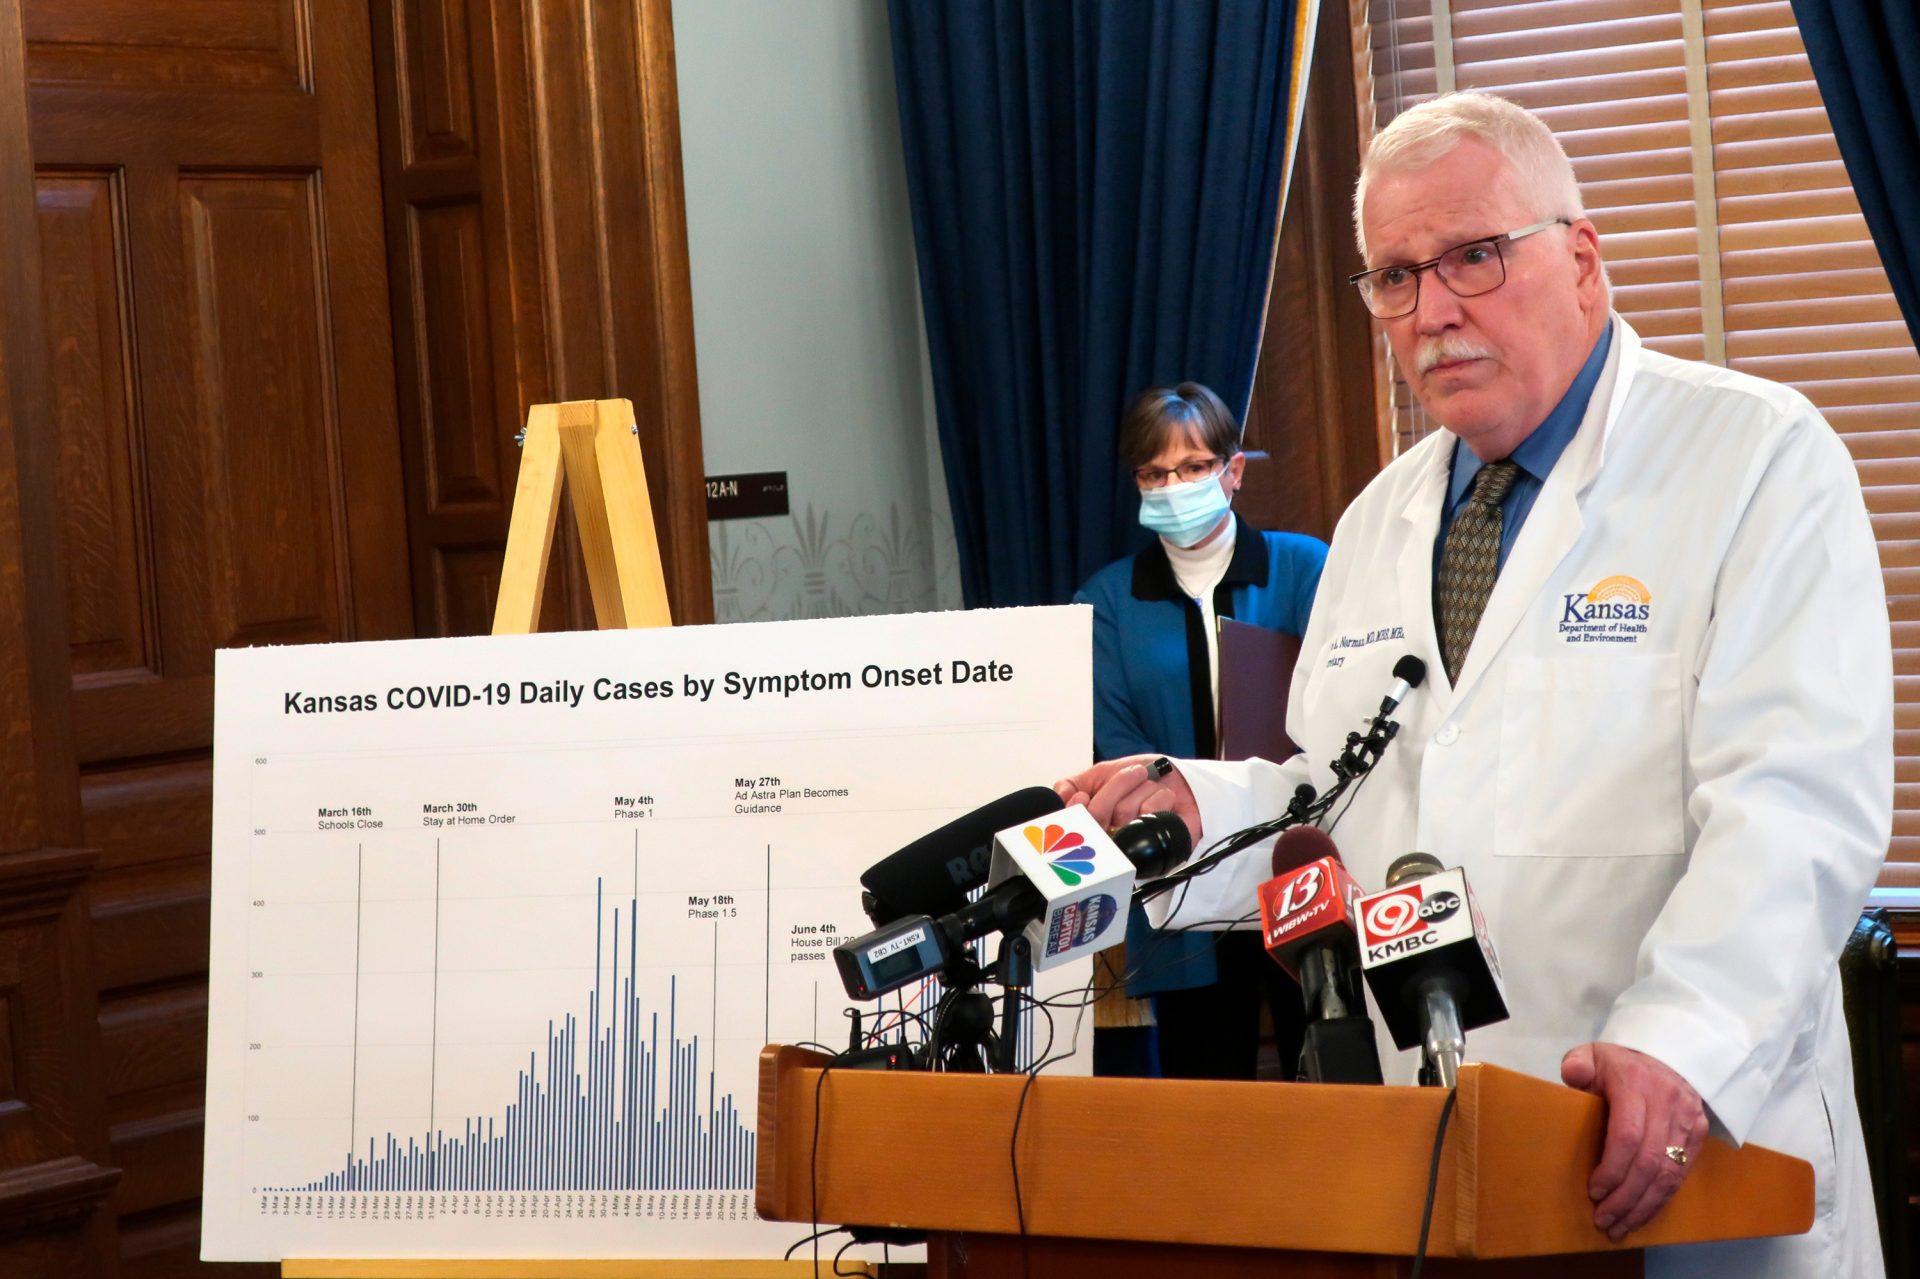 New federal rules for reporting data have caused confusion and delays for state officials trying to monitor the pandemic. Dr. Lee Norman, Secretary of the Kansas Department of Health and Environment, discussed the resurgence in coronavirus cases in Kansas on July 15 in Topeka. Norman called the resurgence "awful."